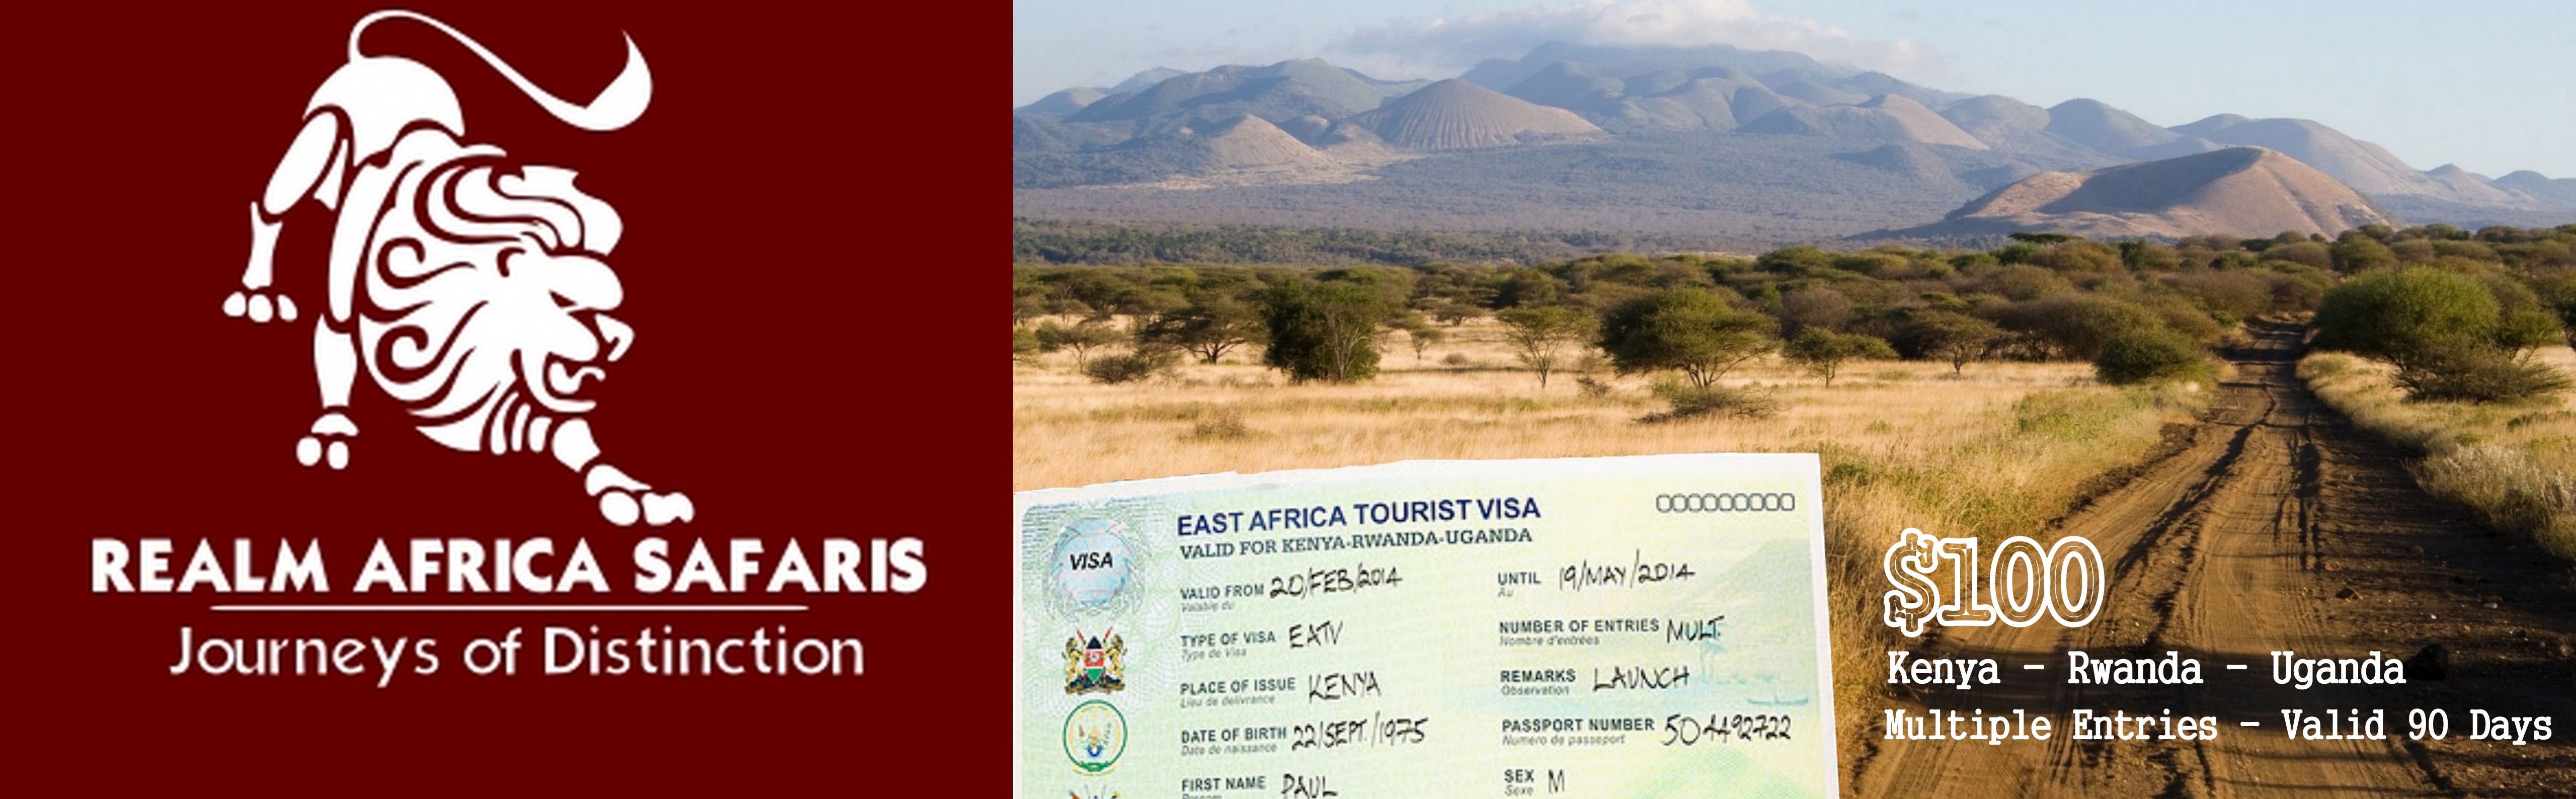 how-to-apply-for-an-east-african-tourist-visa-realm-africa-safaris